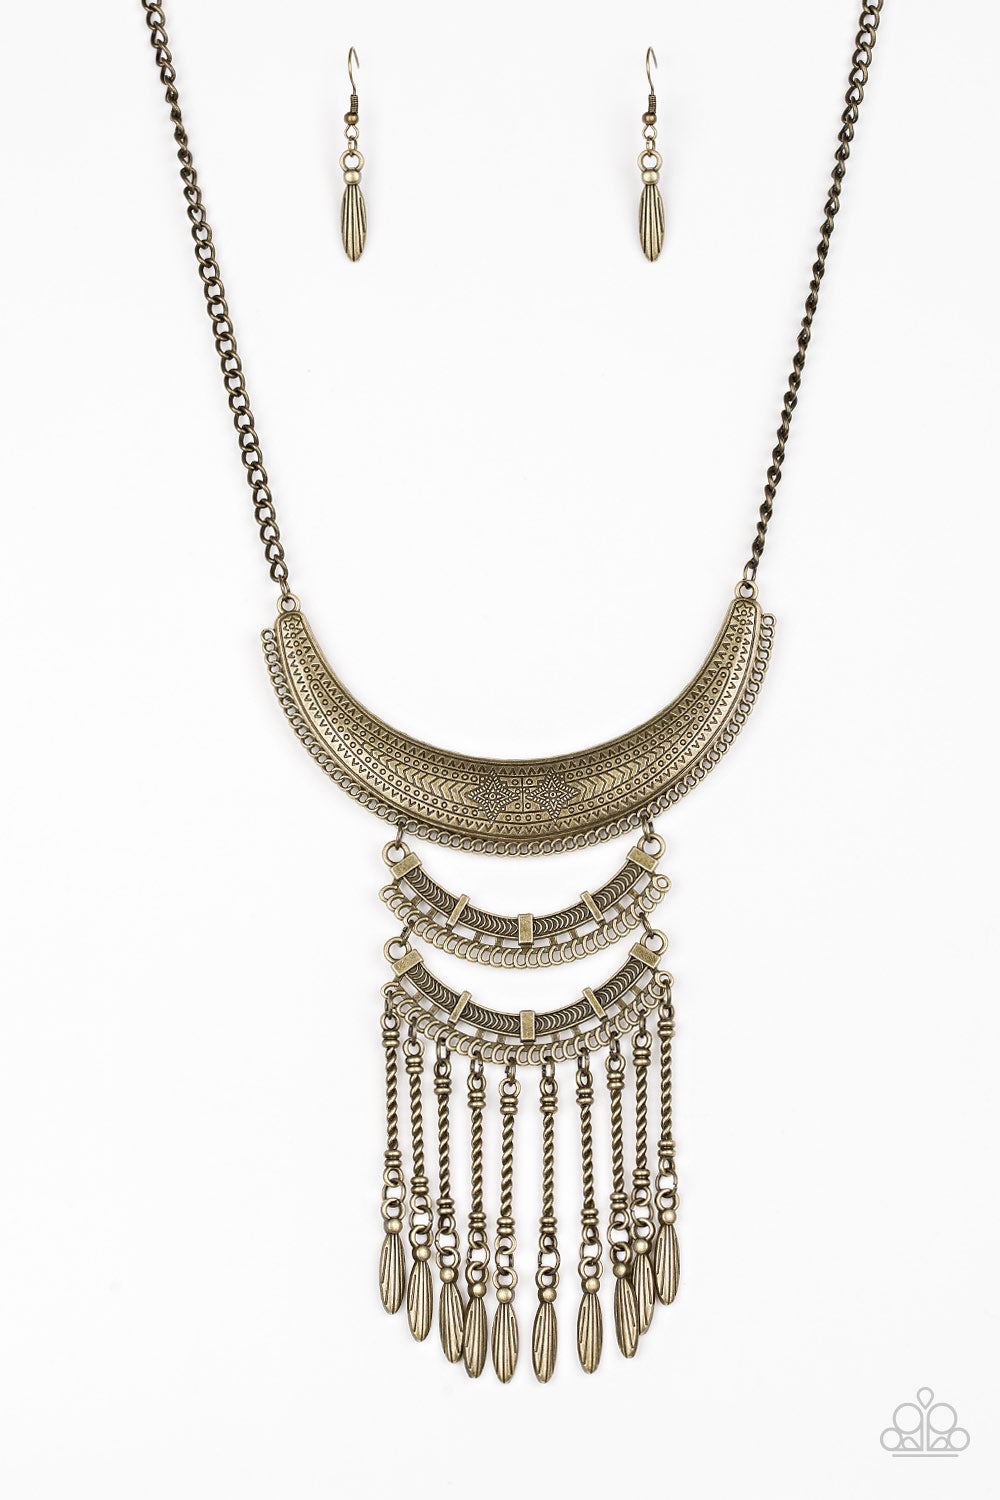 Eastern Empress - Brass Necklace - Paparazzi Accessories - Stamped and embossed in tribal inspired patterns, three brass plates connect down the chest, creating a fiercely stacked pendant. Attached to twisted brass rods, ornate brass beads swing from the bottom of the lowermost plate, creating an eye-catching fringe. Features an adjustable clasp closure. Sold as one individual necklace.